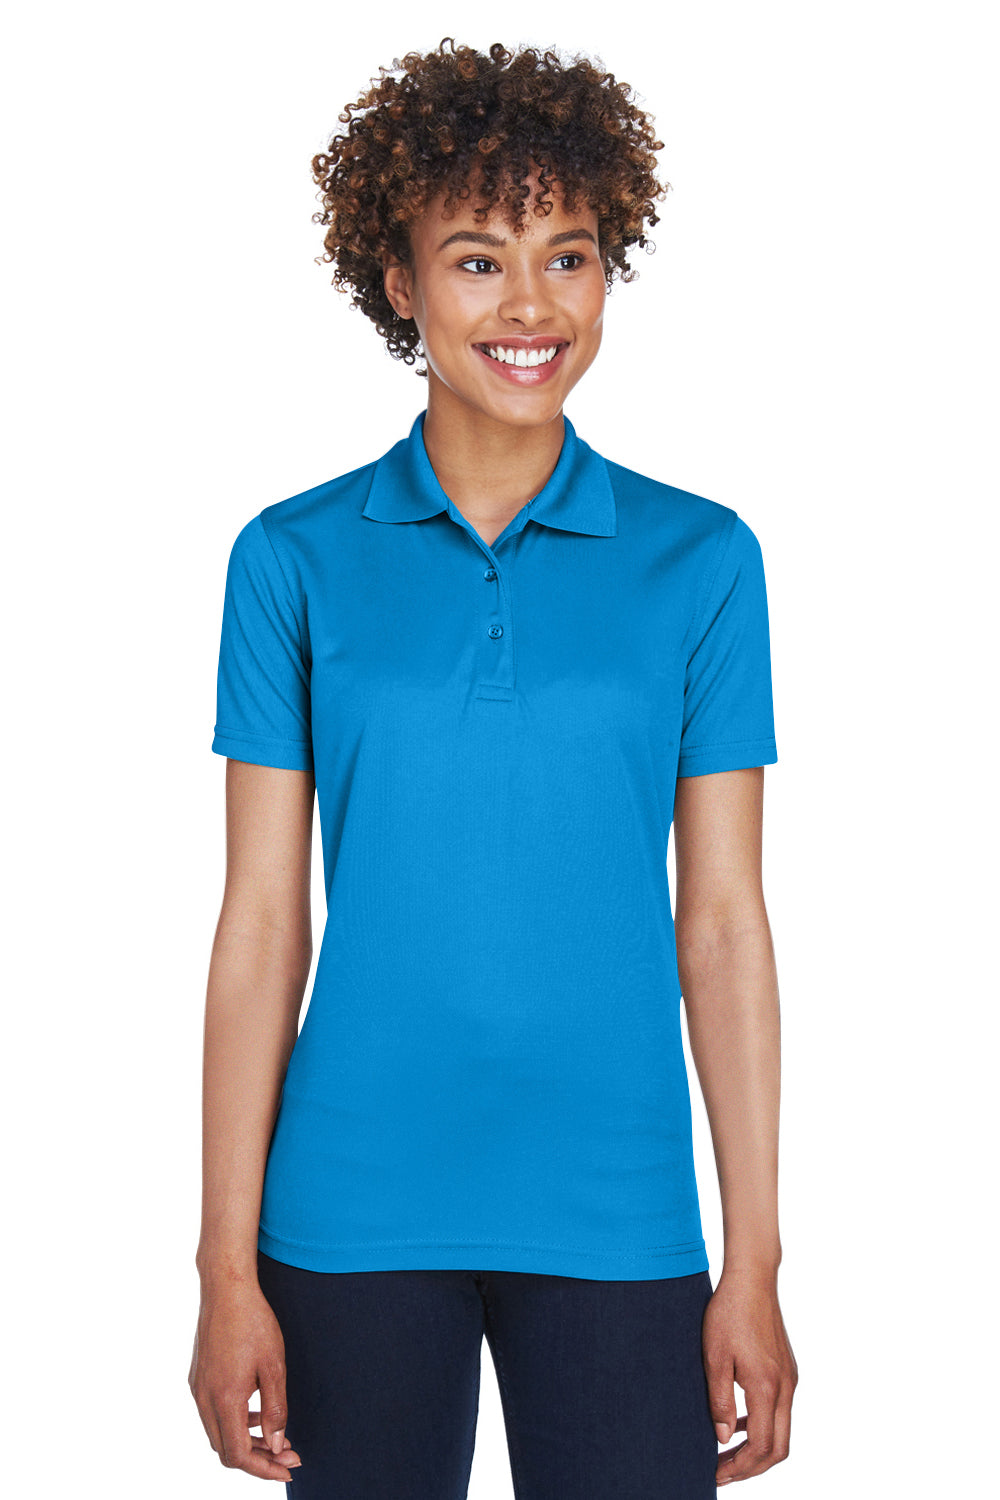 UltraClub 8210L Womens Cool & Dry Moisture Wicking Short Sleeve Polo Shirt Pacific Blue Front